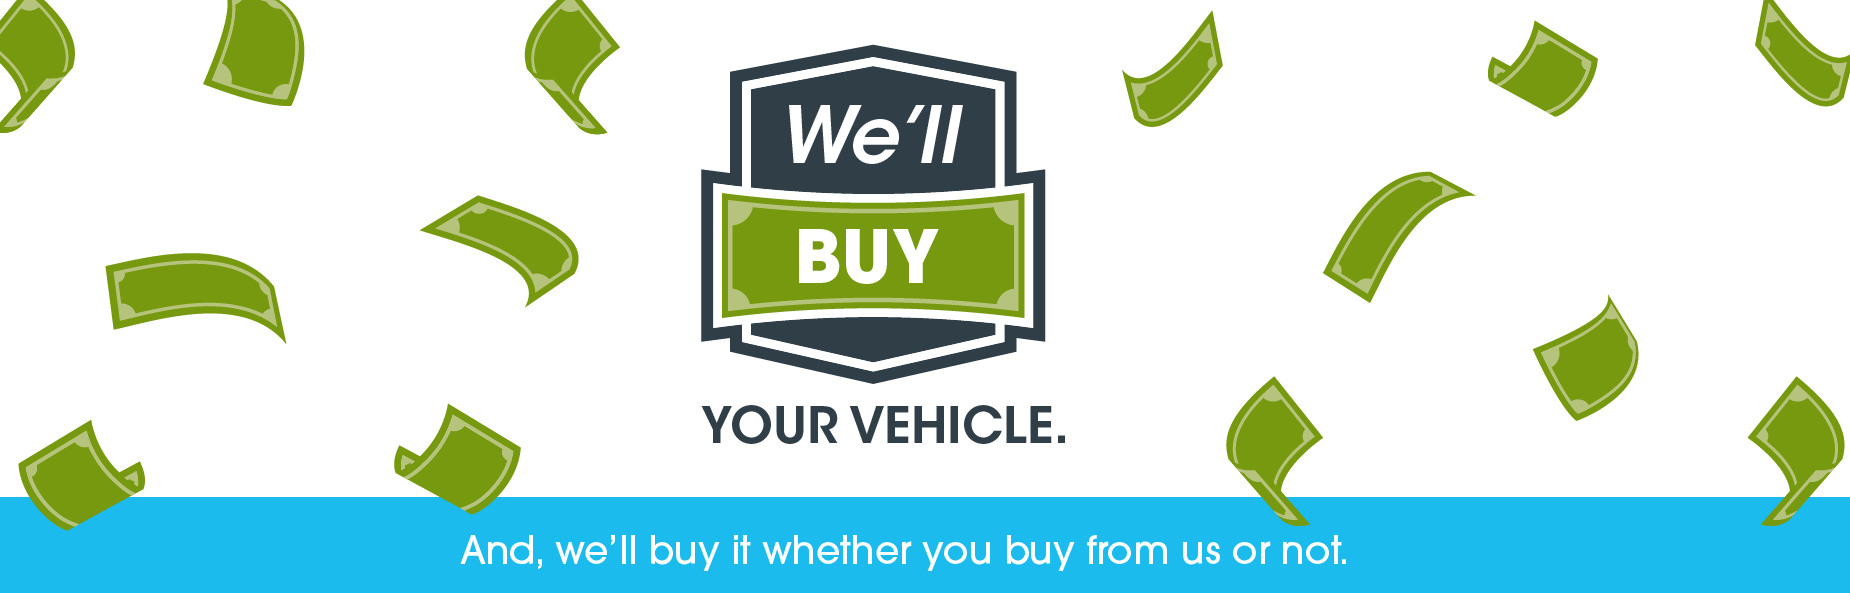 well buy your vehicle banner